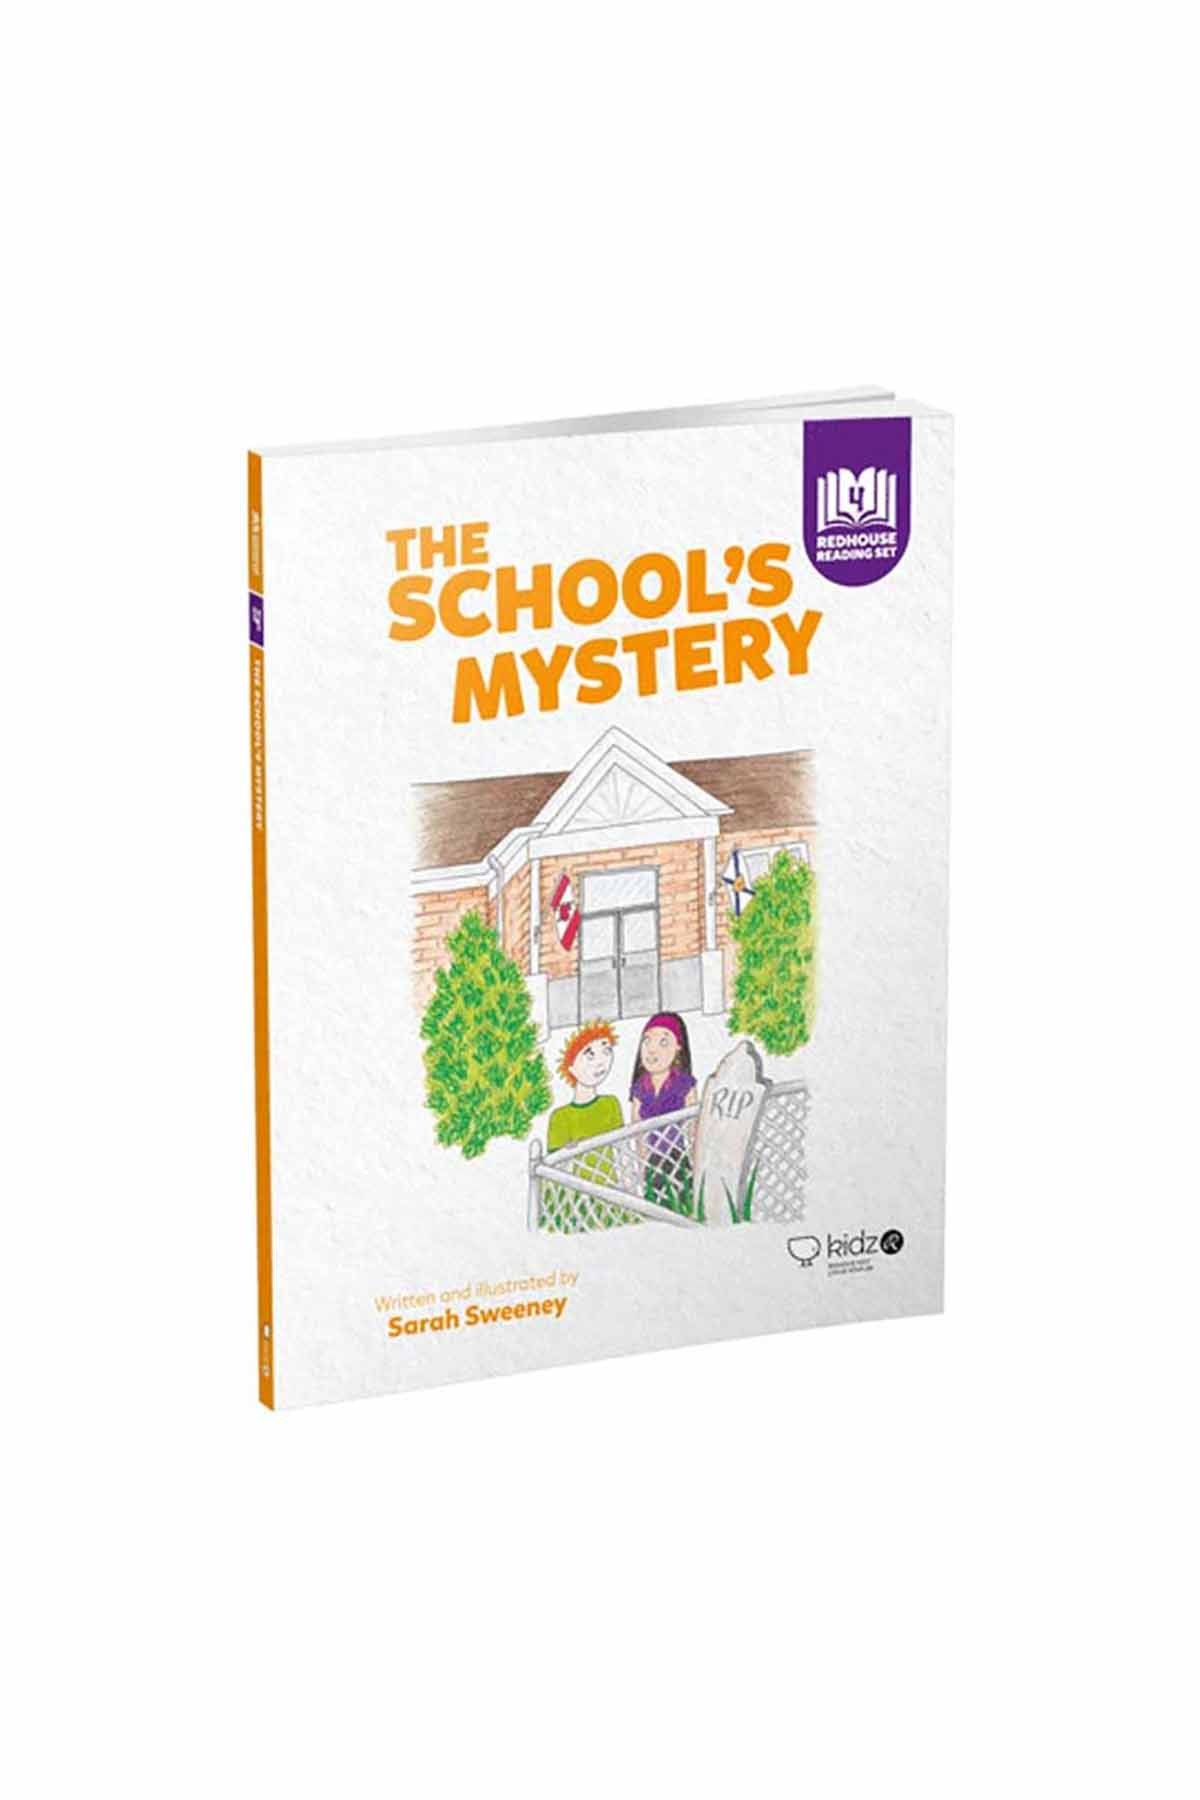 Redhouse Reading Set 5 The School's Mystery